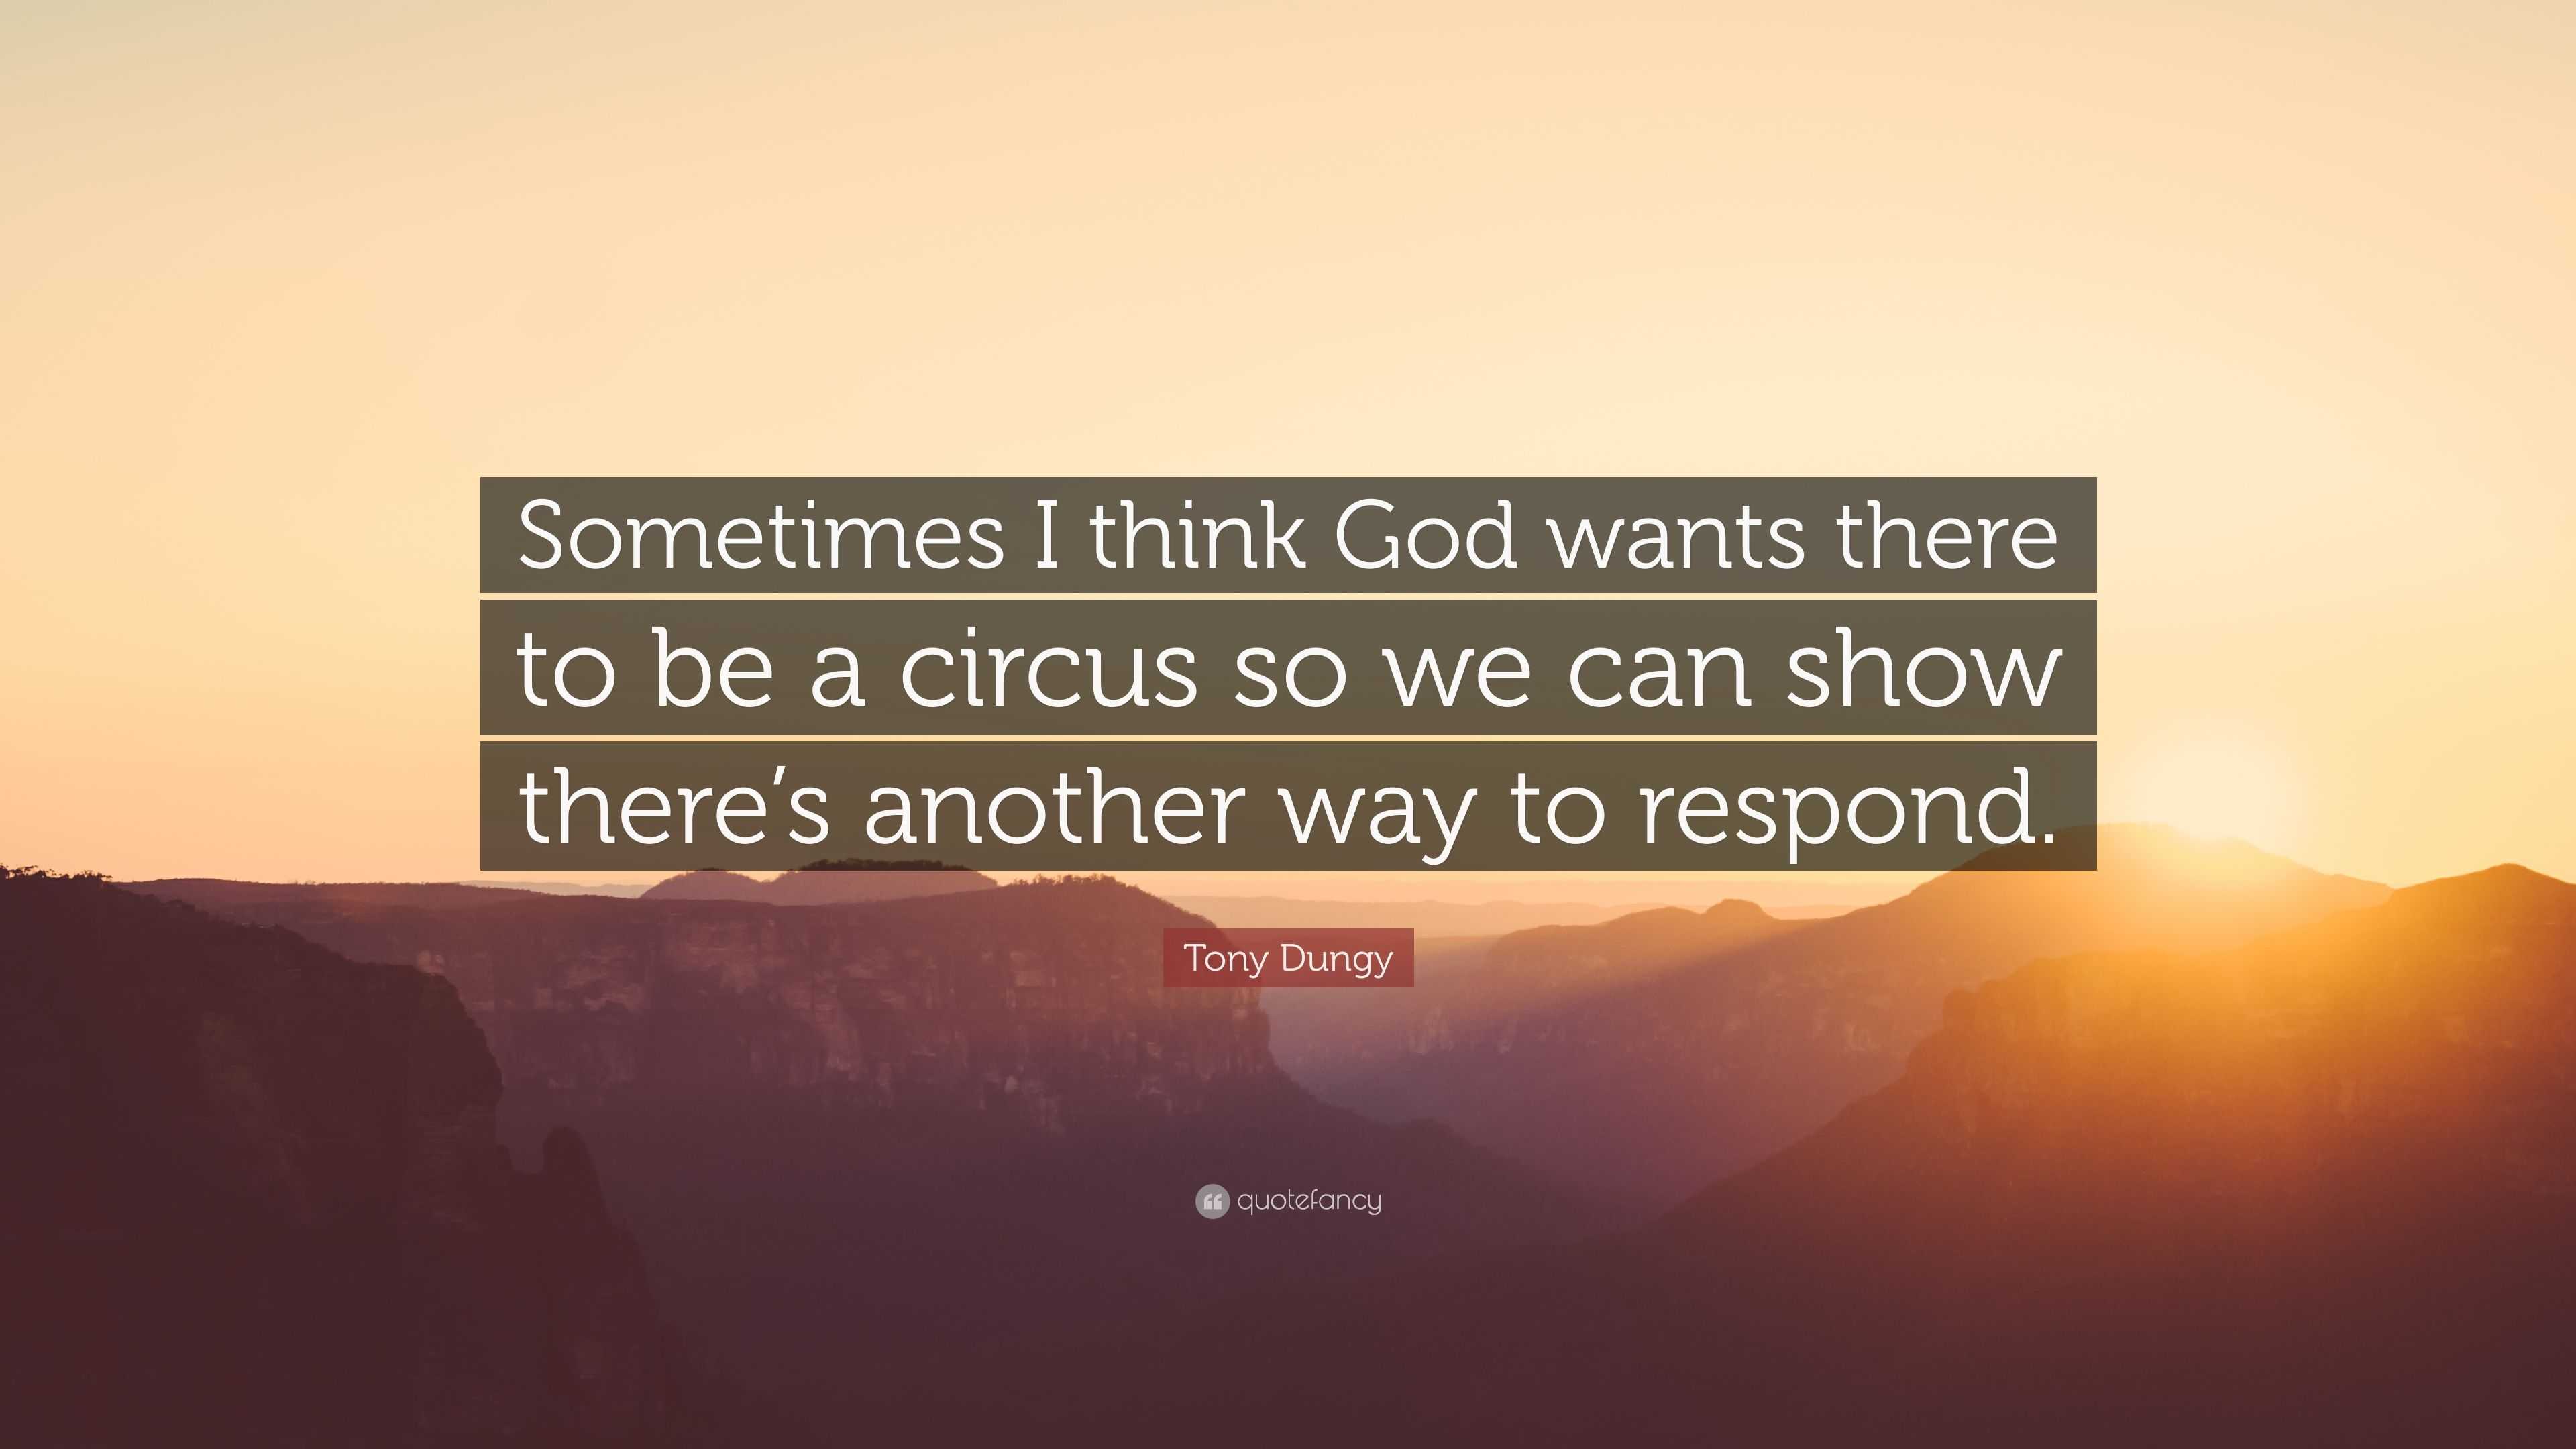 Tony Dungy Quote: “Sometimes I think God wants there to be a circus so we  can